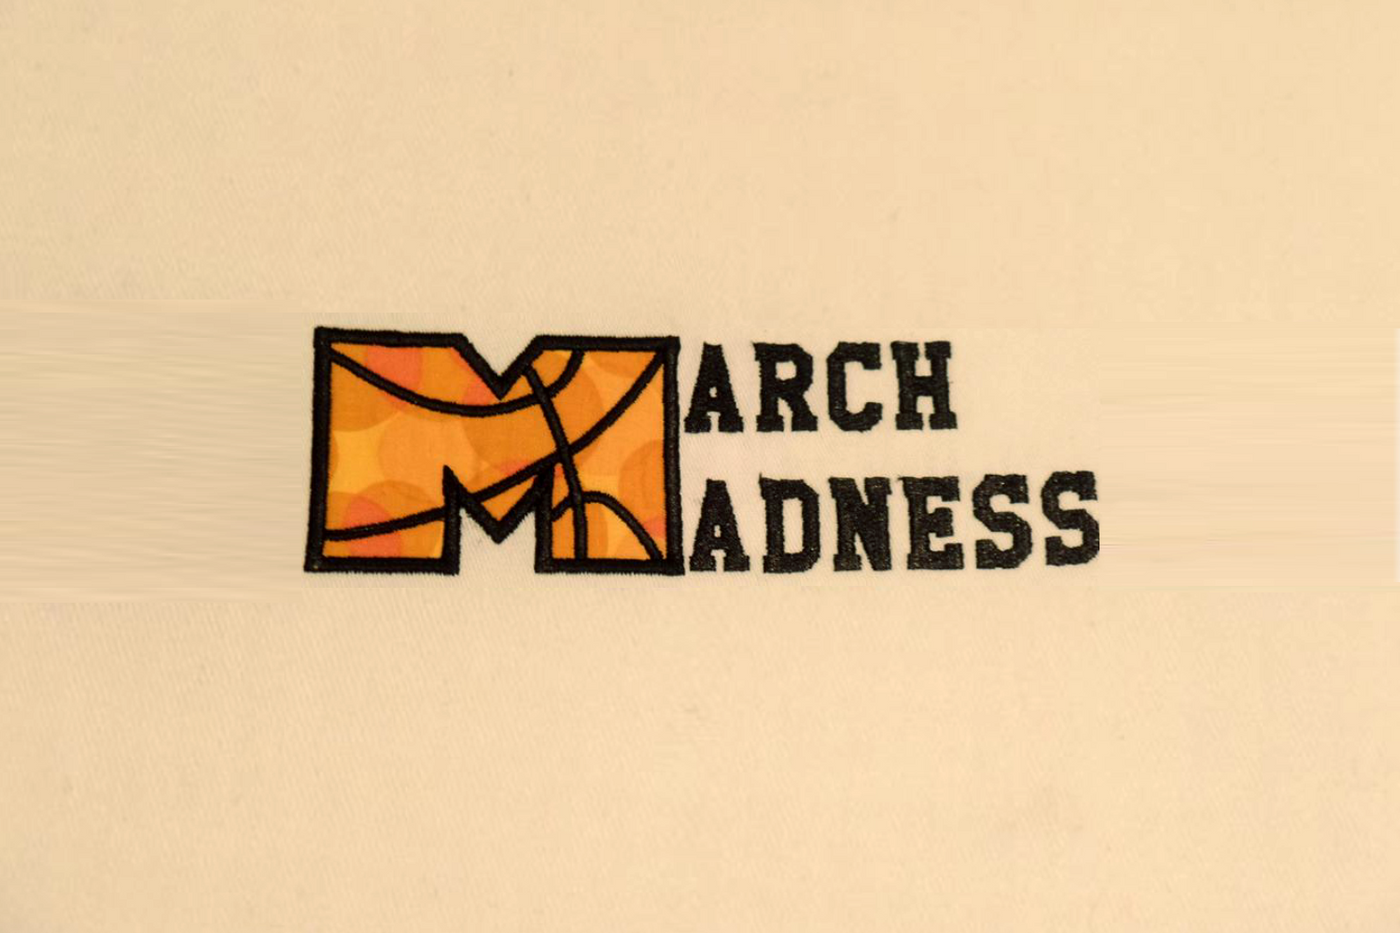 Applique that says "March Madness." The M has lines added to look like a basketball